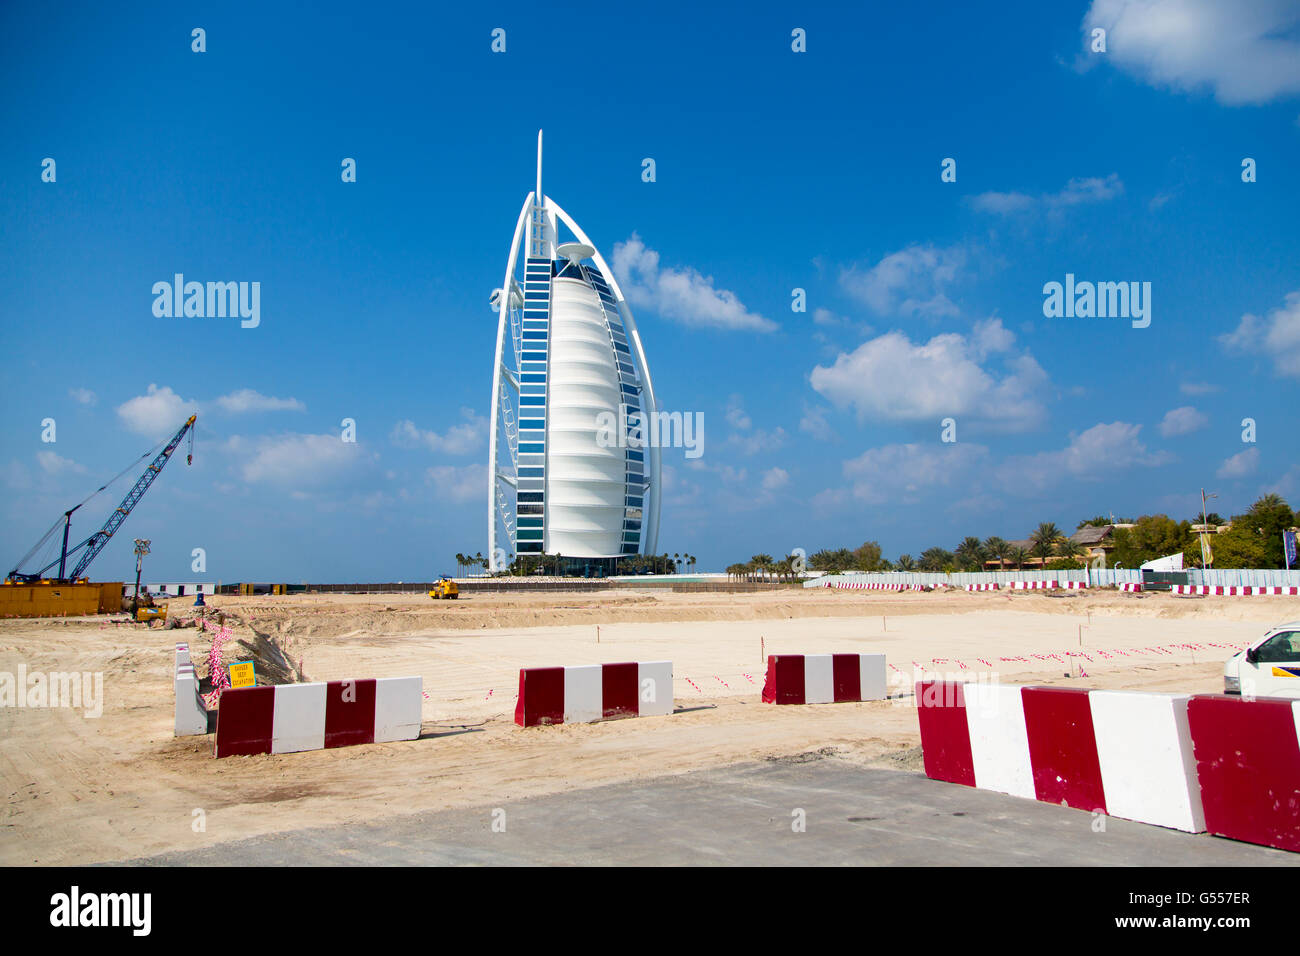 DUBAI, UAE - JANUARY 16, 2014: Burj Al Arab hotel in Dubai. The complex stands on an artificial island and is connected to the m Stock Photo